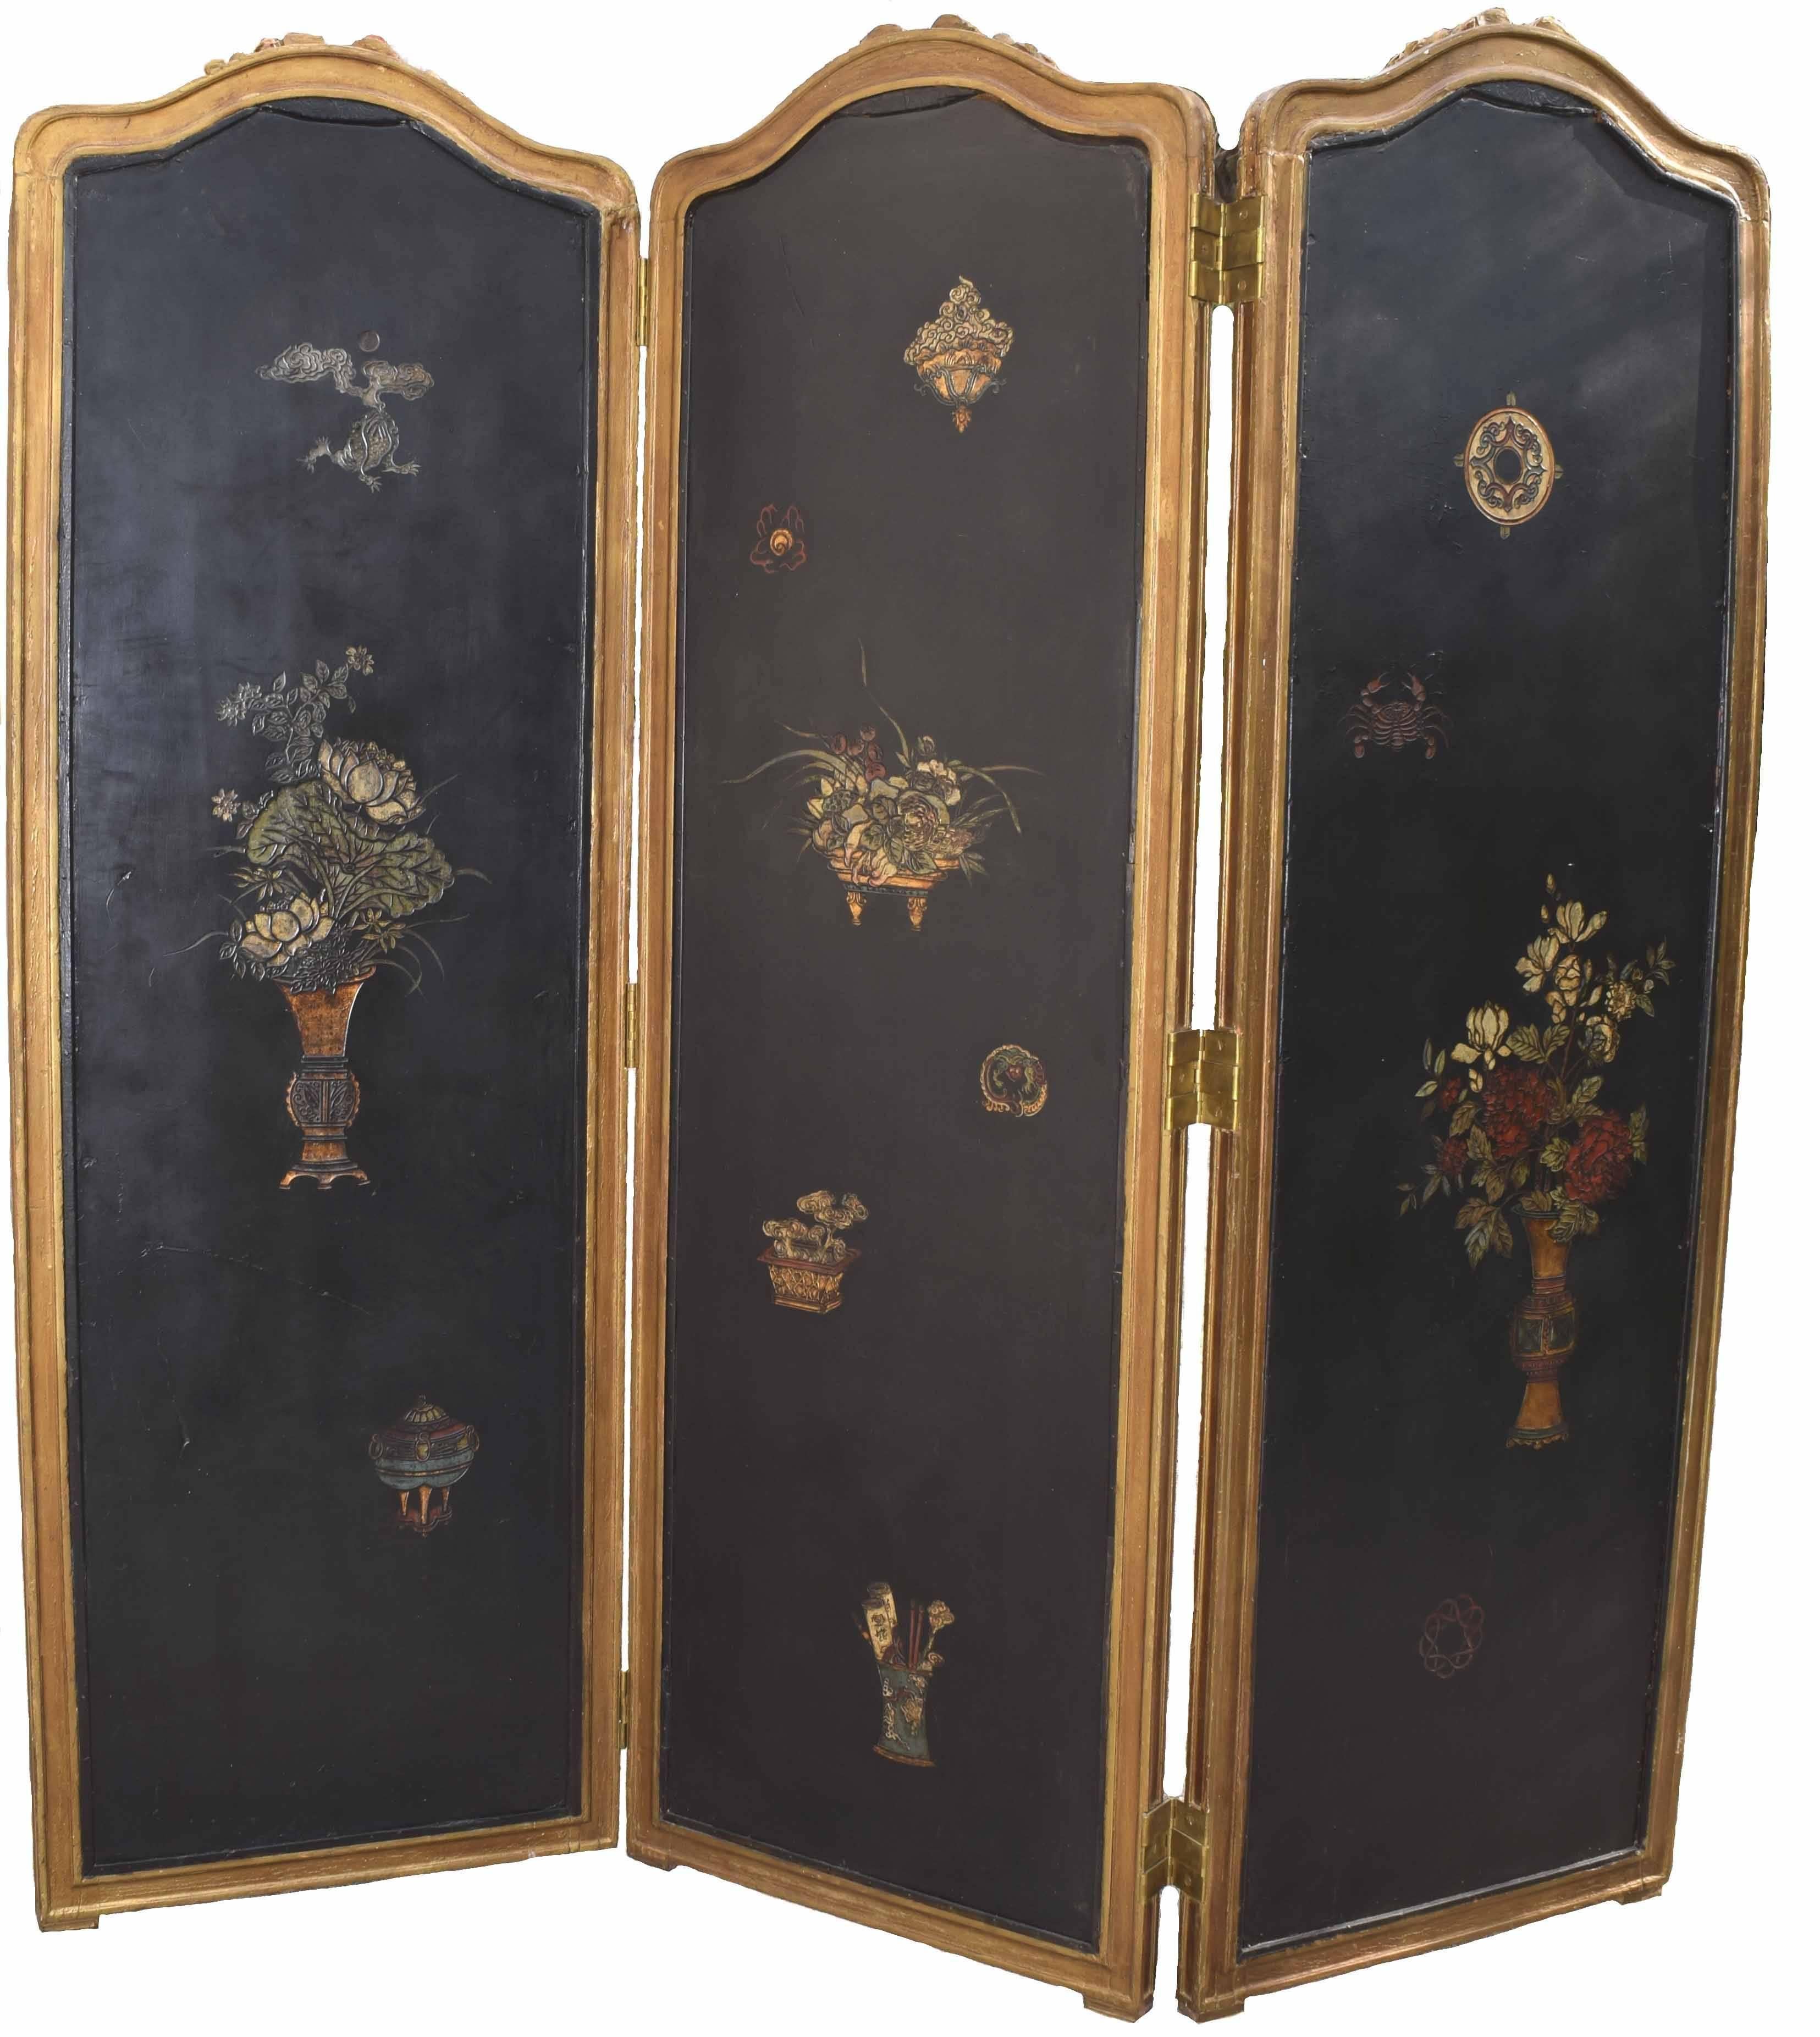 French antique gold-leaf three-panel folding screen inset with antique Chinese coromandel scenic panels; each painted with rockwork. Flowering these and exotic birds in muted tones against a back ground, circa 1870.